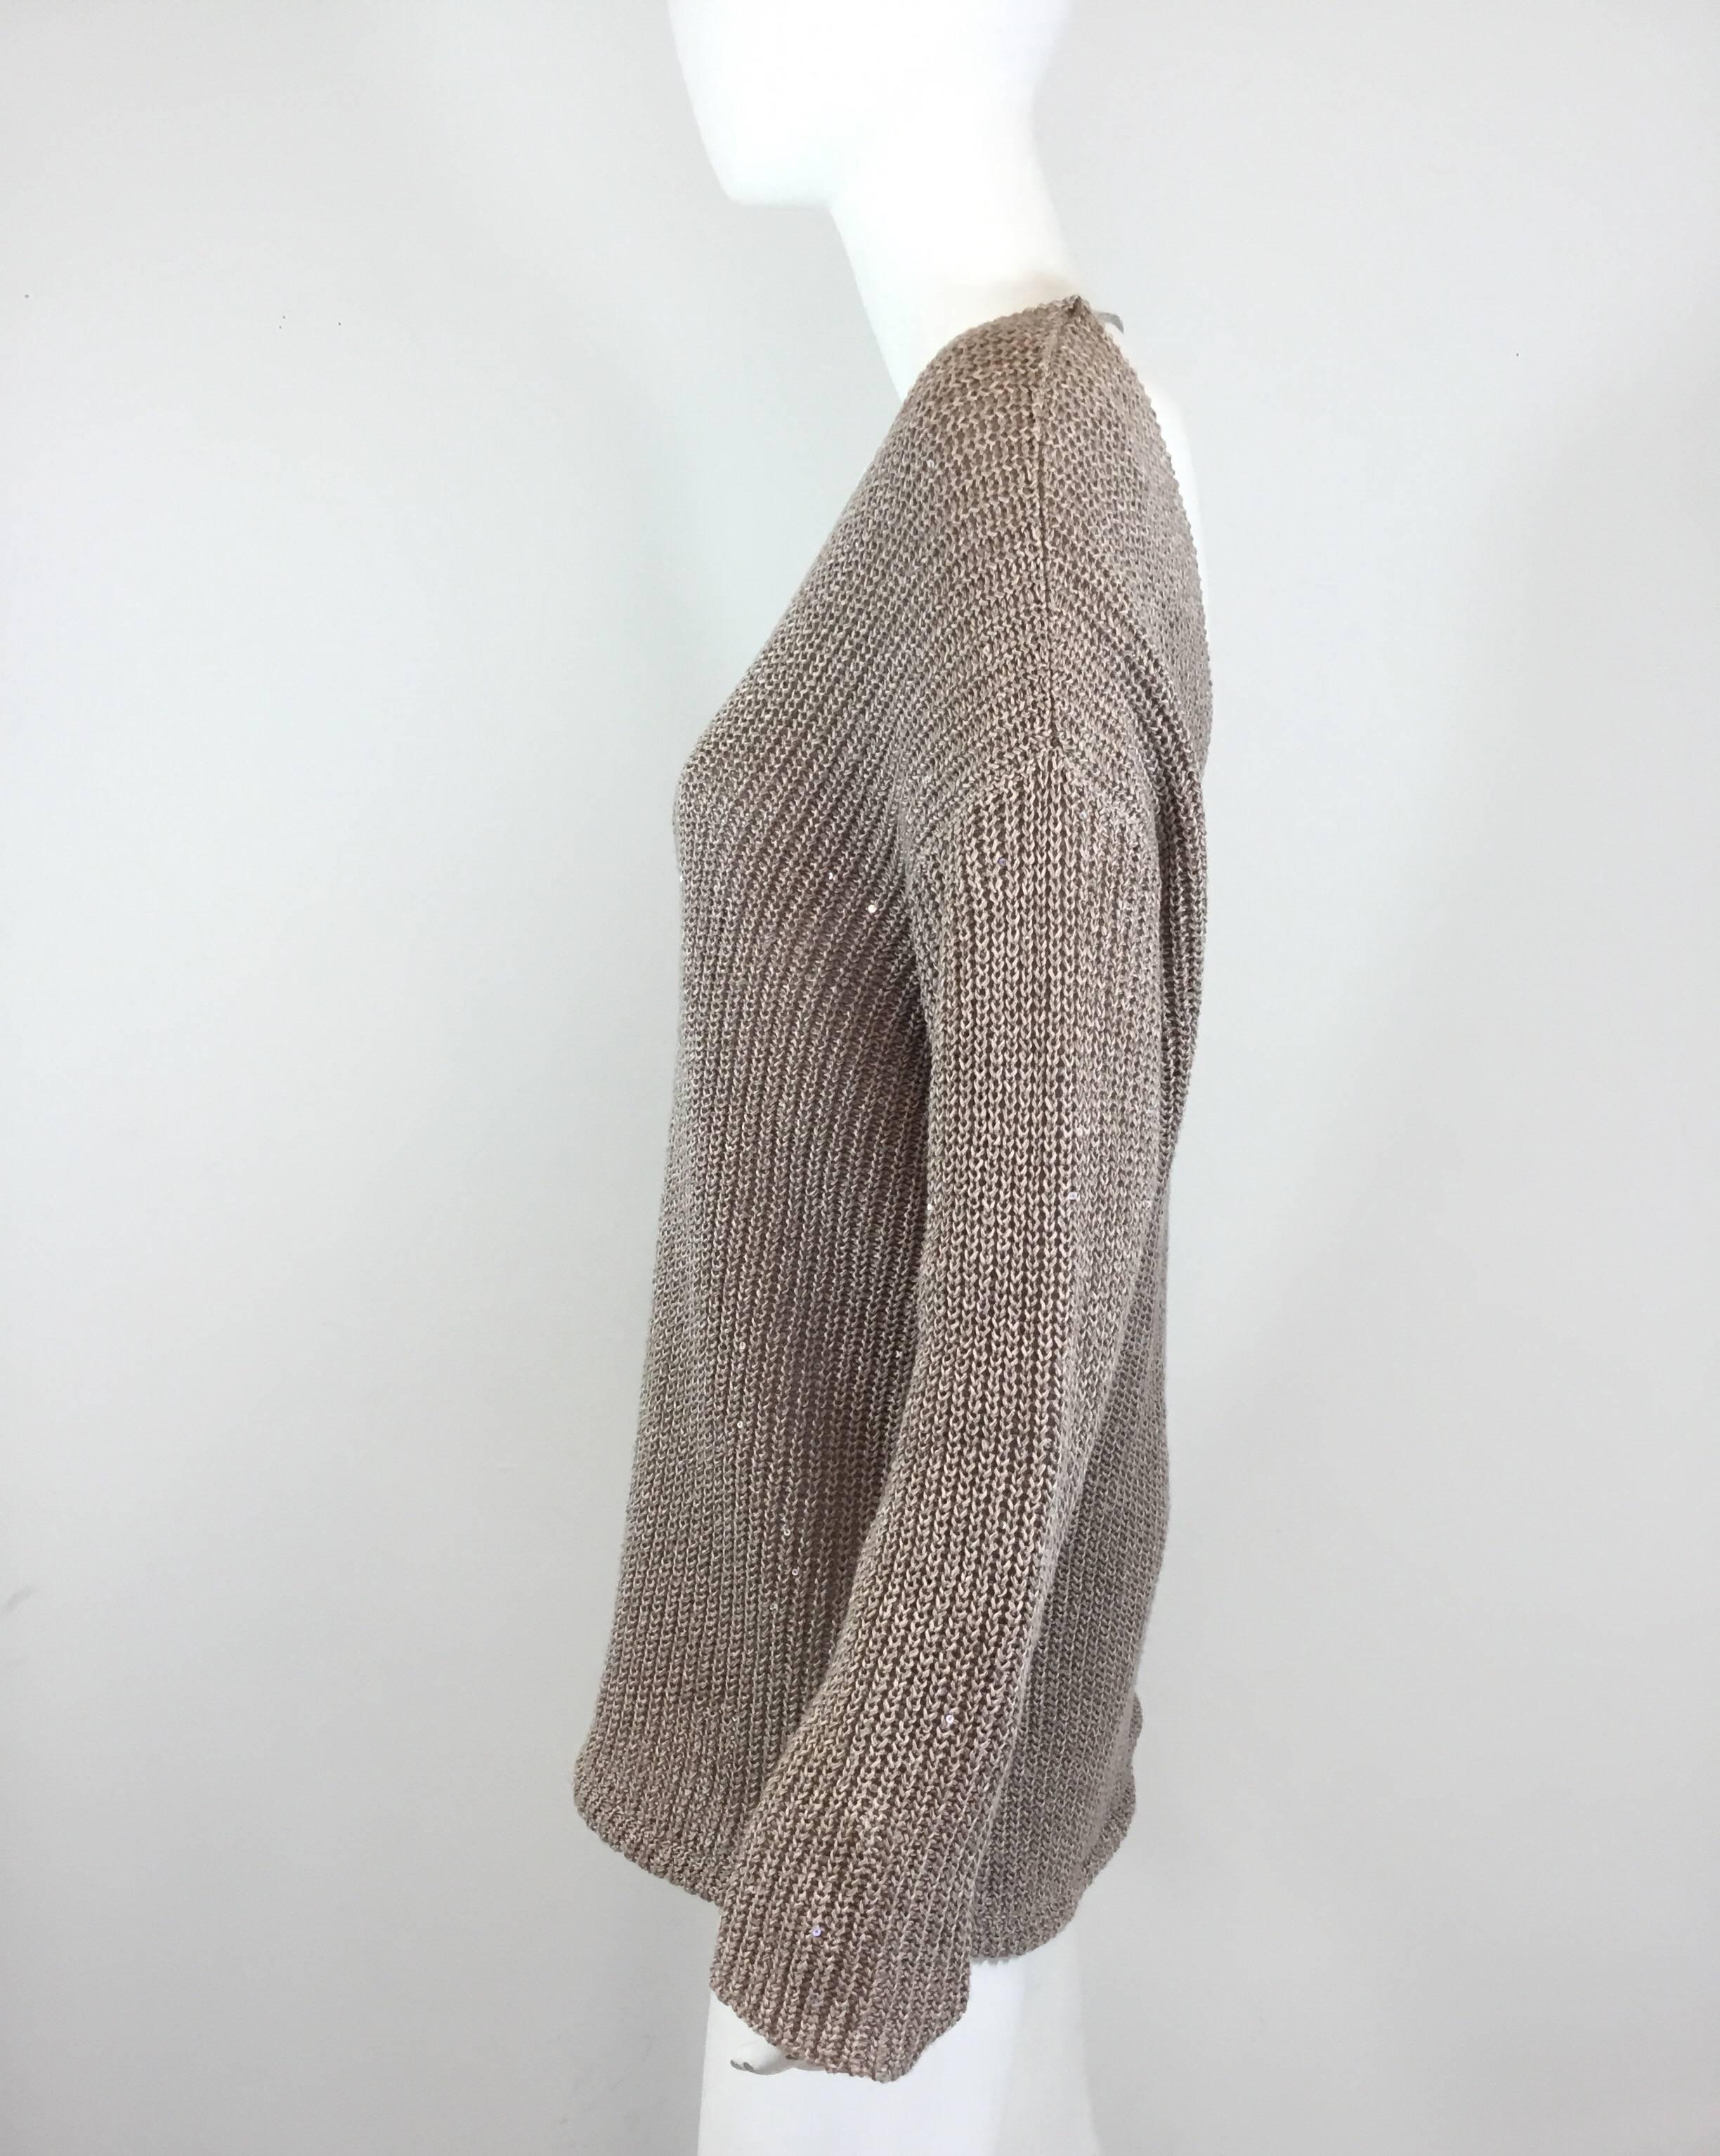 Brunello Cucinelli Sweater:

• Taupe sweater with subtle sequins throughout

• Open back with a string and button fastening across

• Drawstrings at the hem

• Bust 41”, sleeves 21”, length 19”